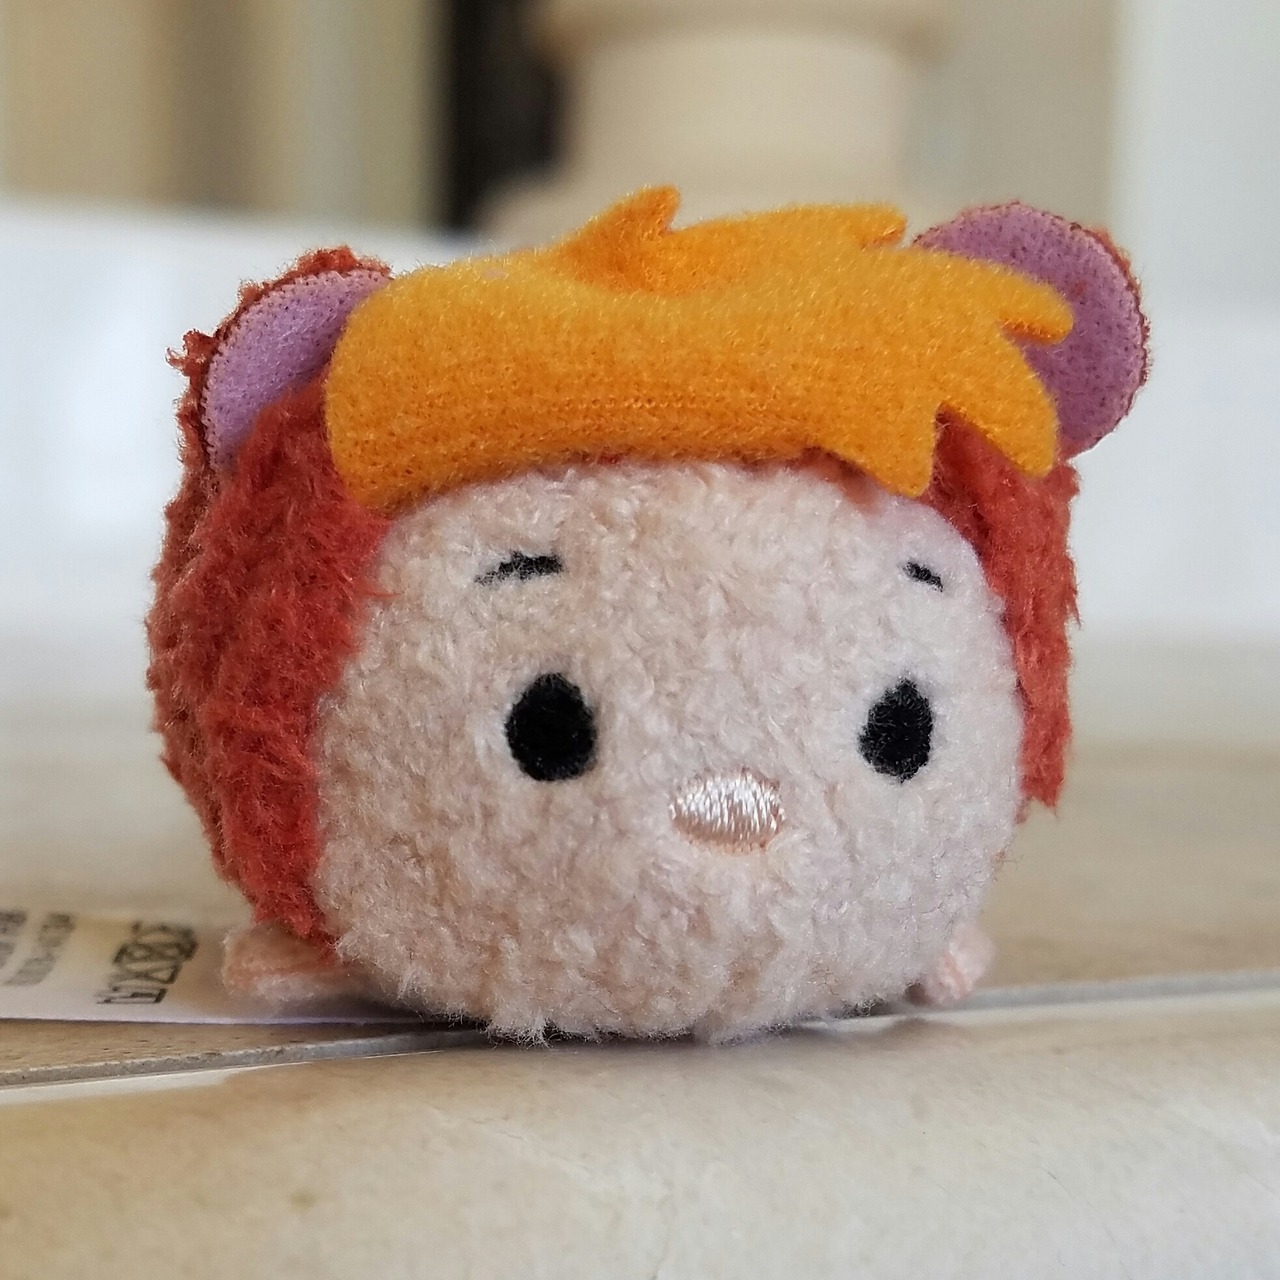 springy haired tsum